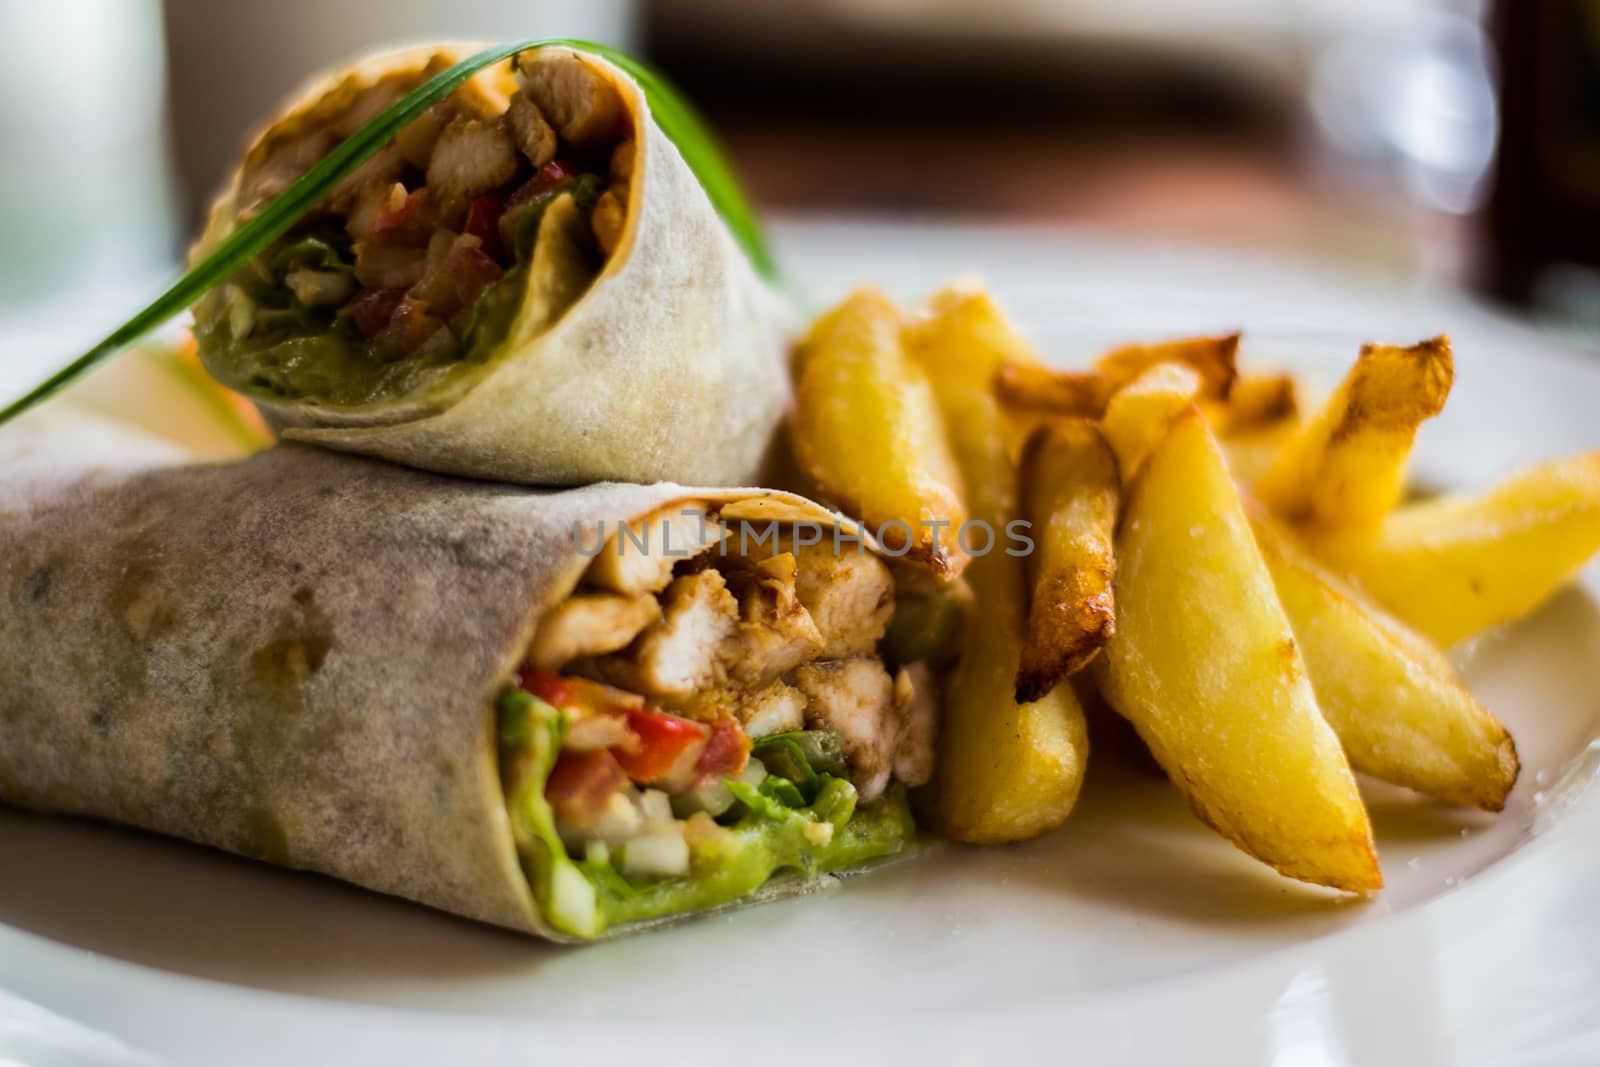 Tasty wraps with chicken, avocado, lettuce and french fries on a plate. Selective focus